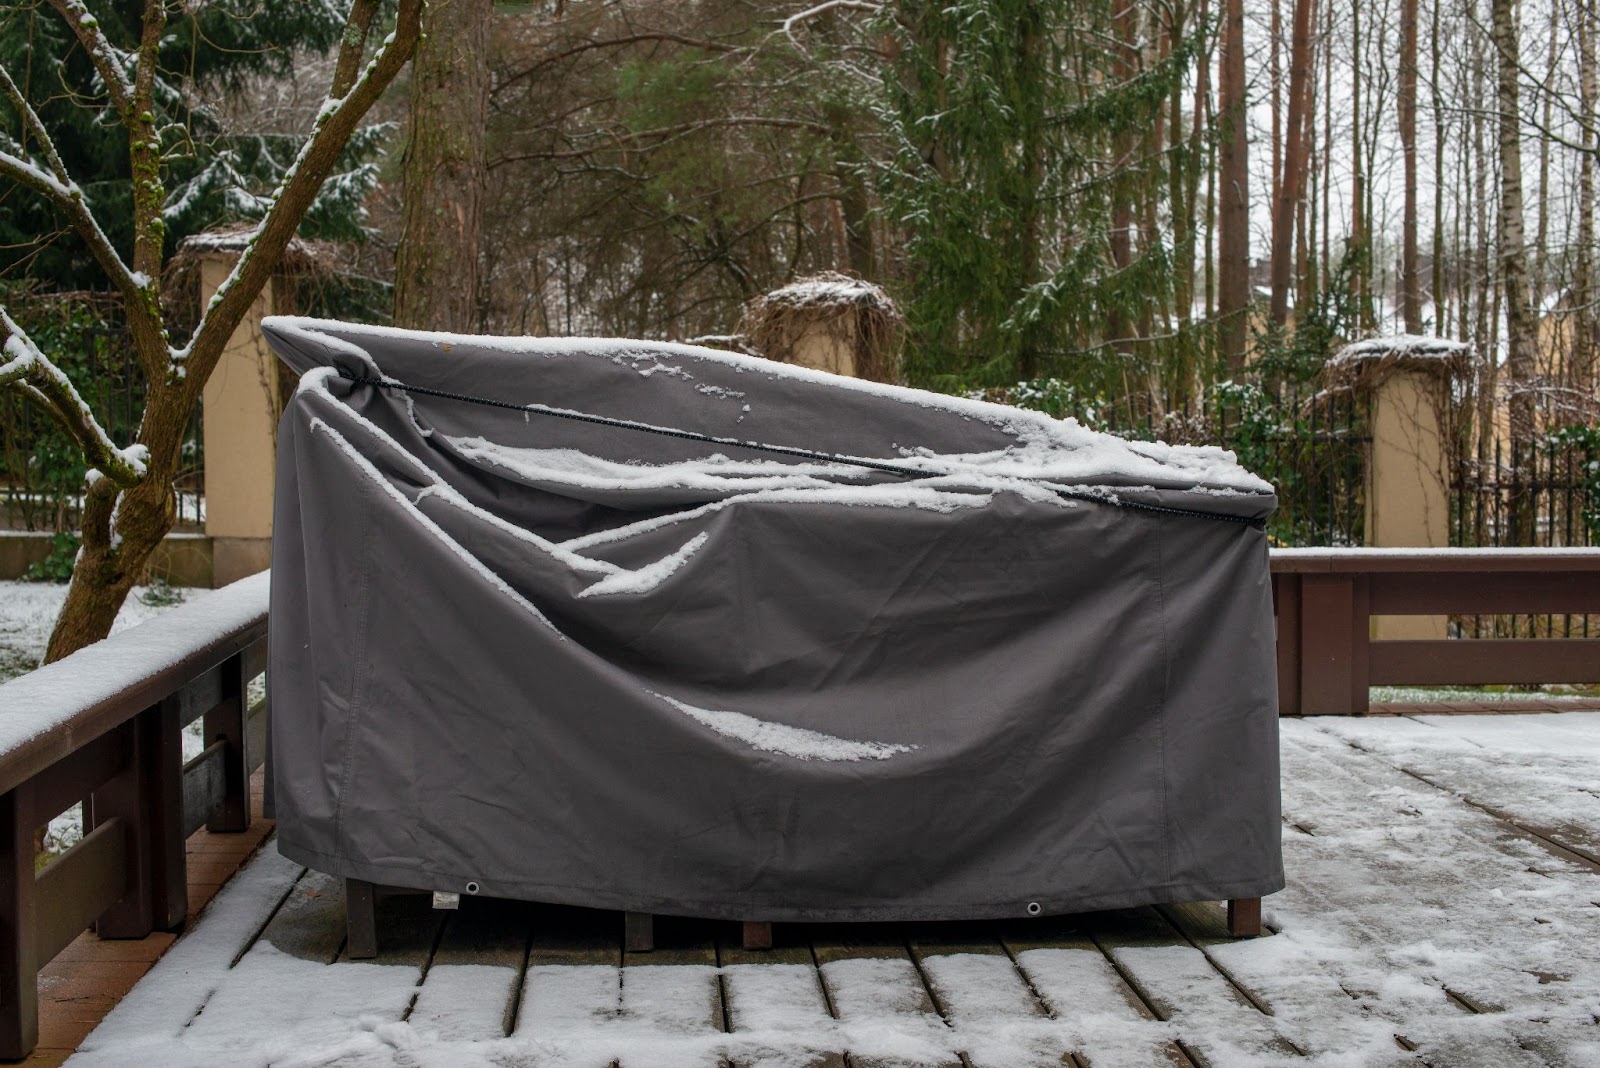 Winterizing Your Outdoor Kitchen Properly